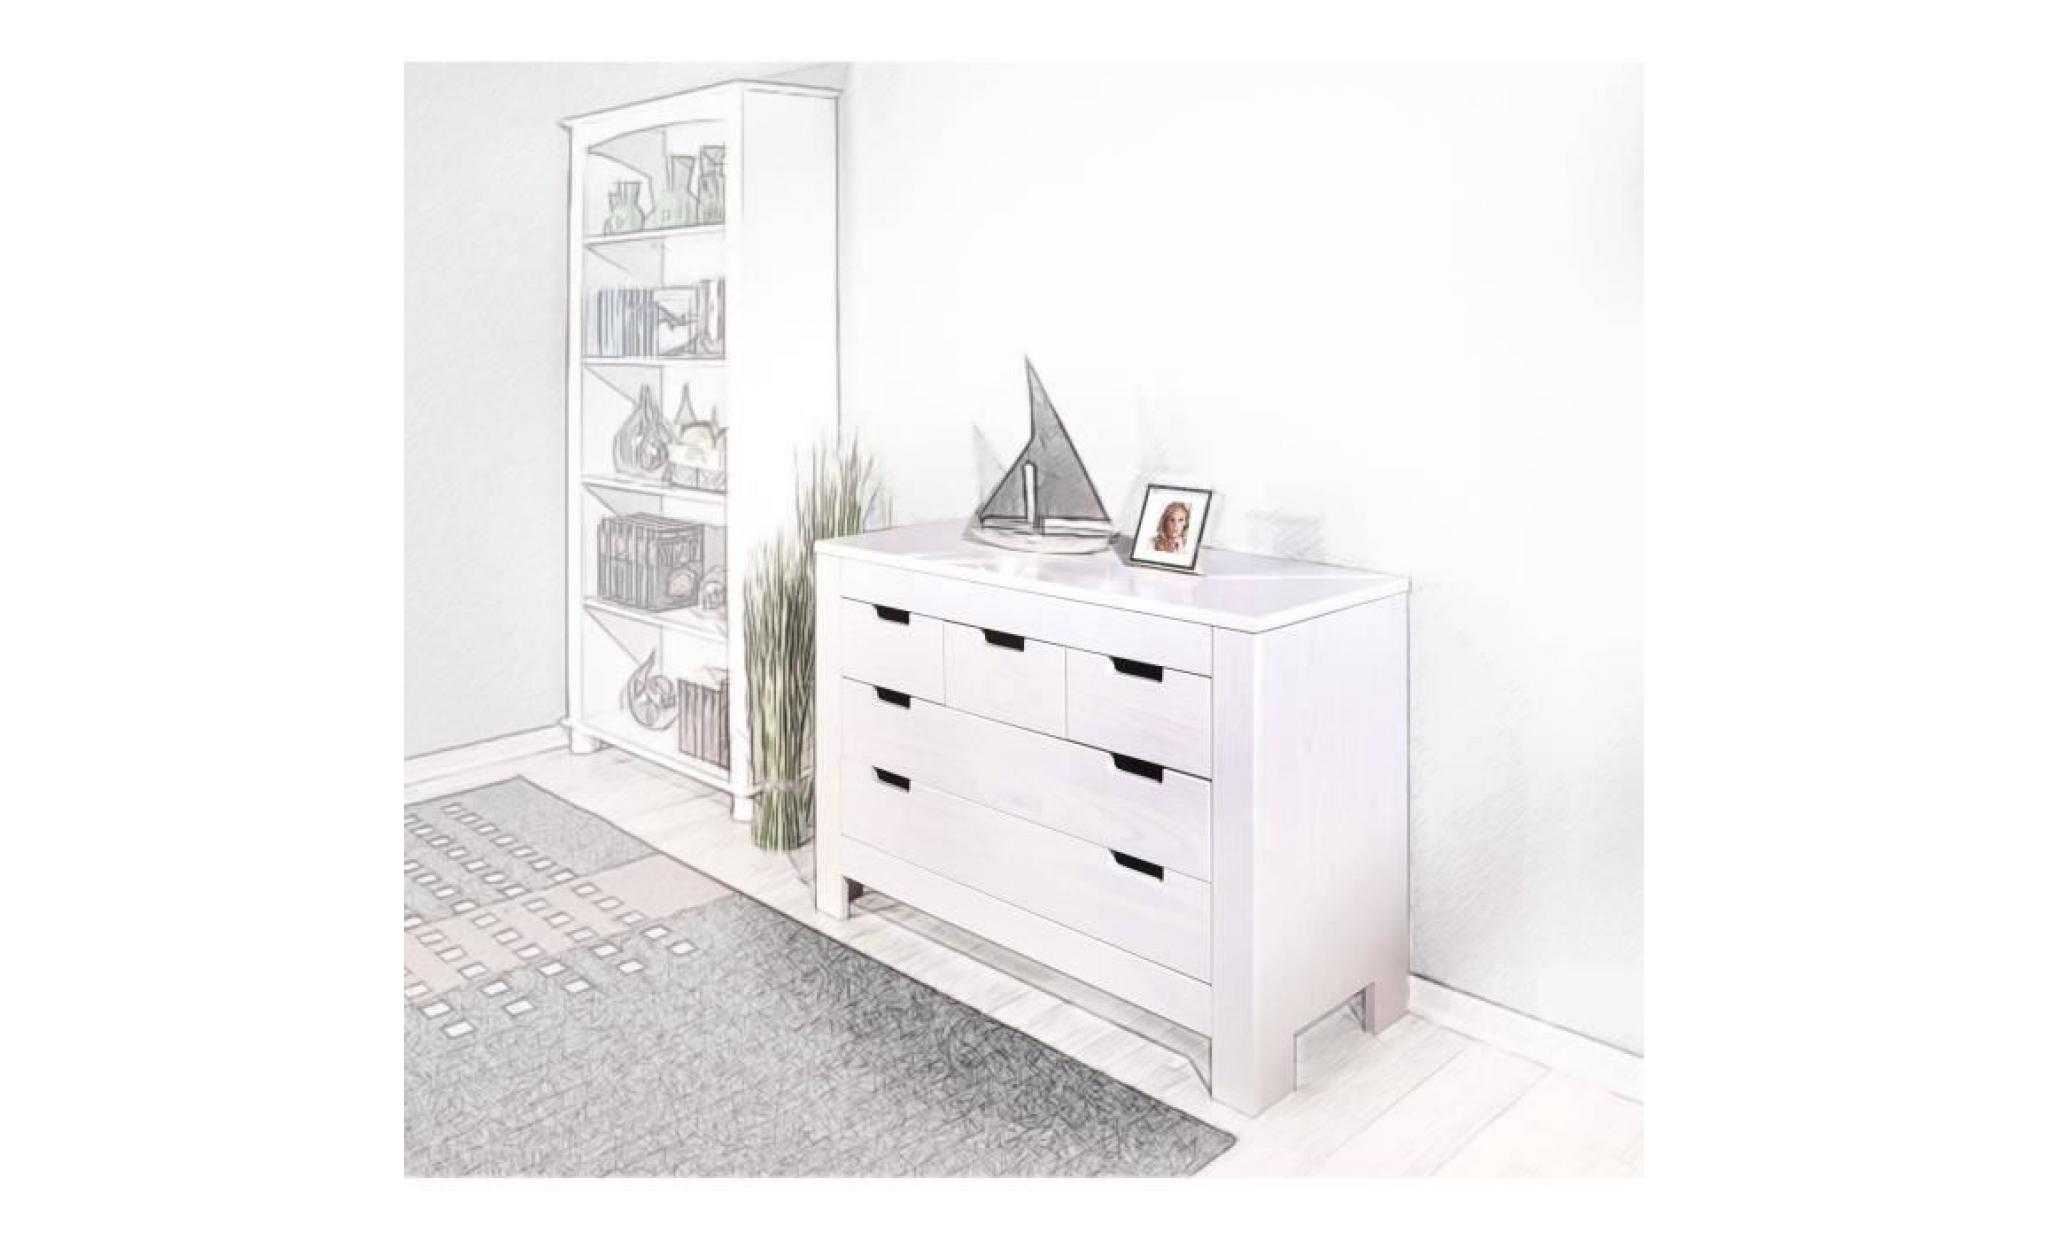 grande commode 5 tiroirs, commode en pin massif, commode chambre blanche, commode chiffonnier, armoire commode, meuble en pin pas cher